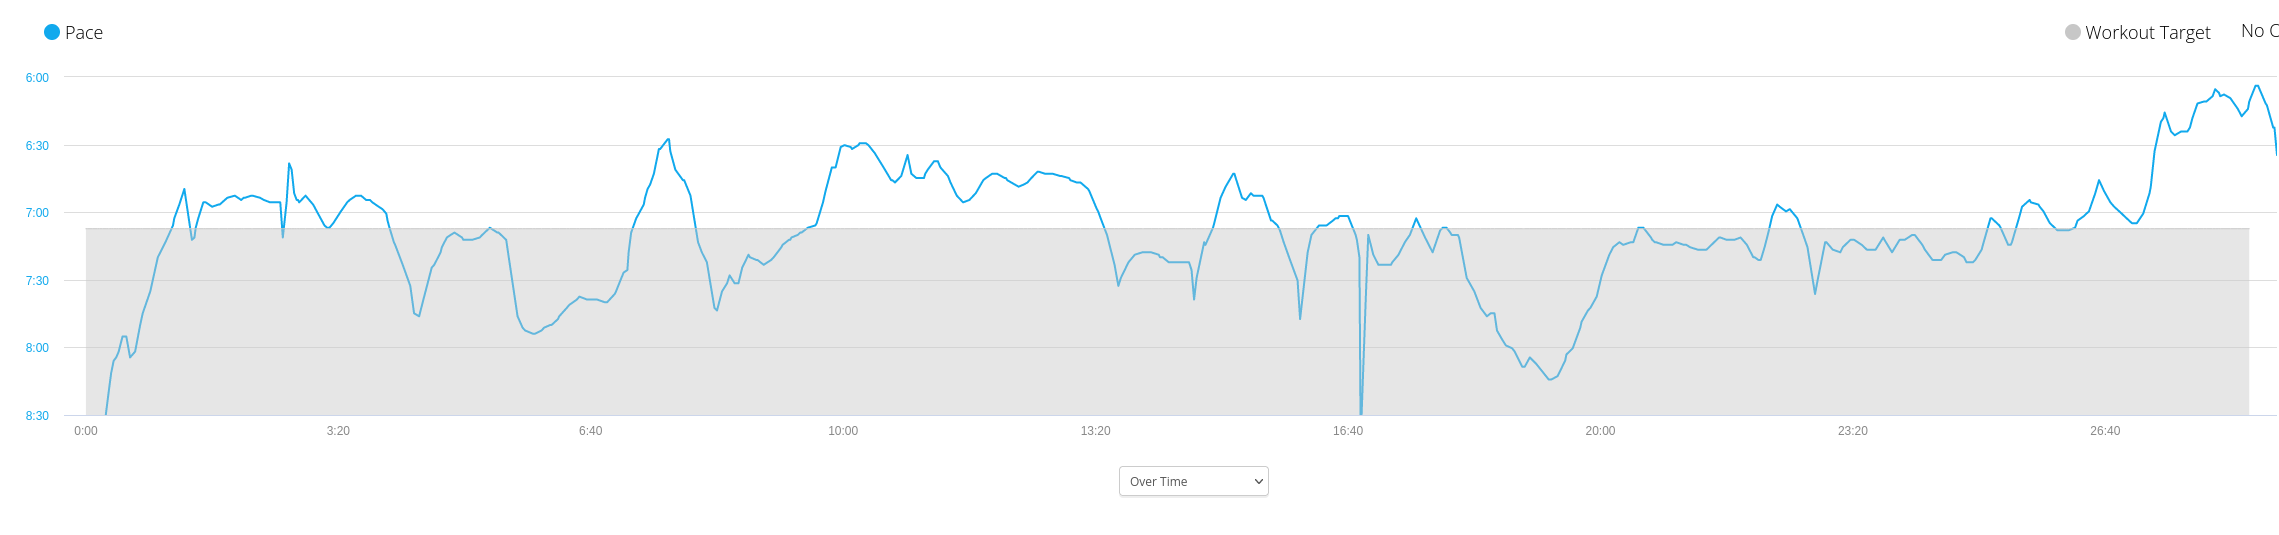 graph of pace as recorded by Garmin watch